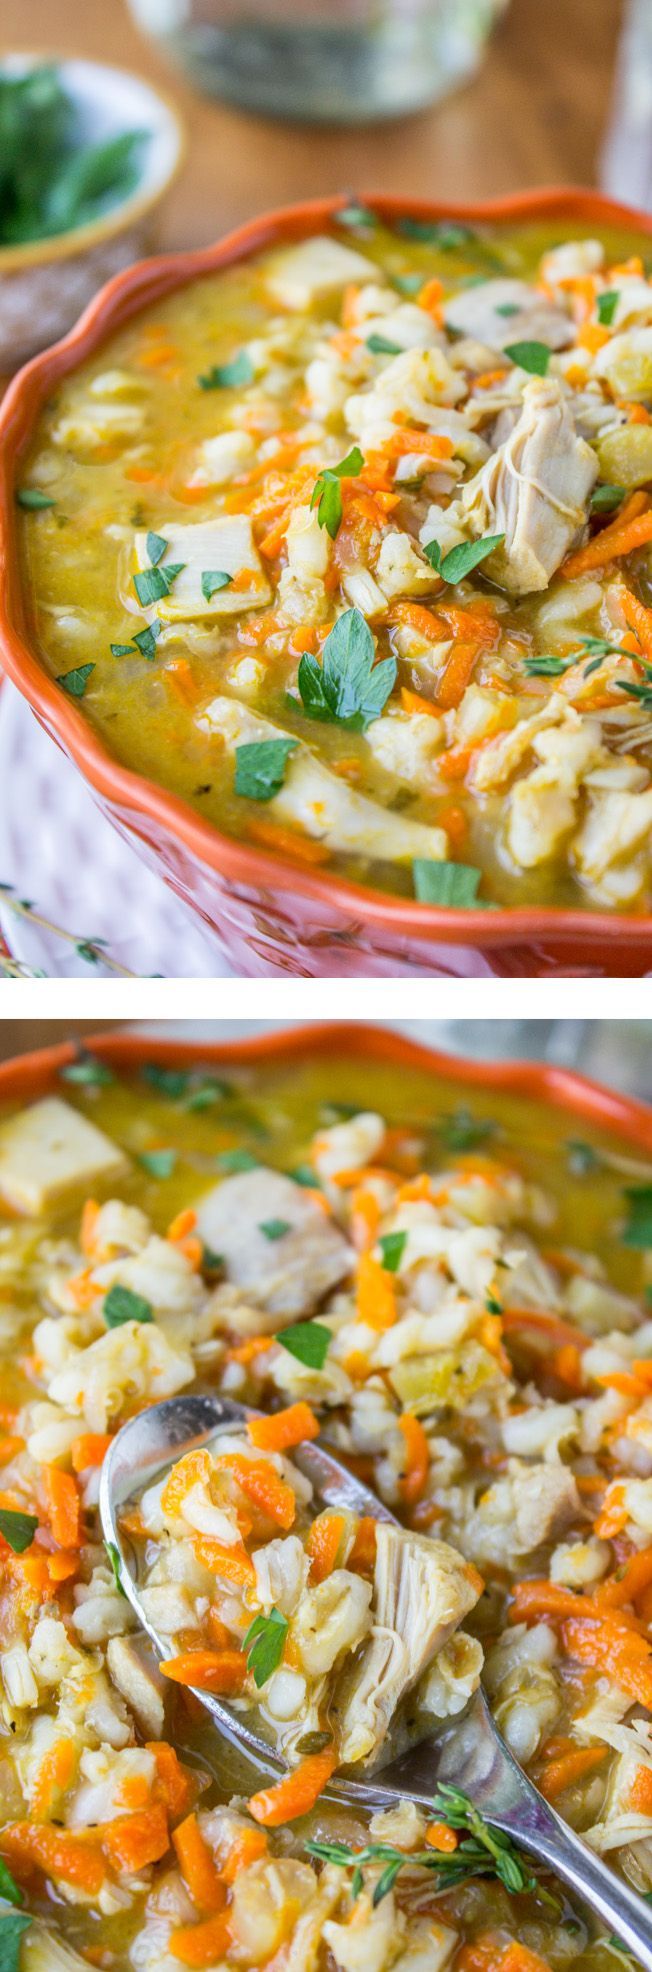 Turkey Barley Soup (Slow Cooker) from The Food Charlatan. Make this soup with all your Thanksgiving leftovers!